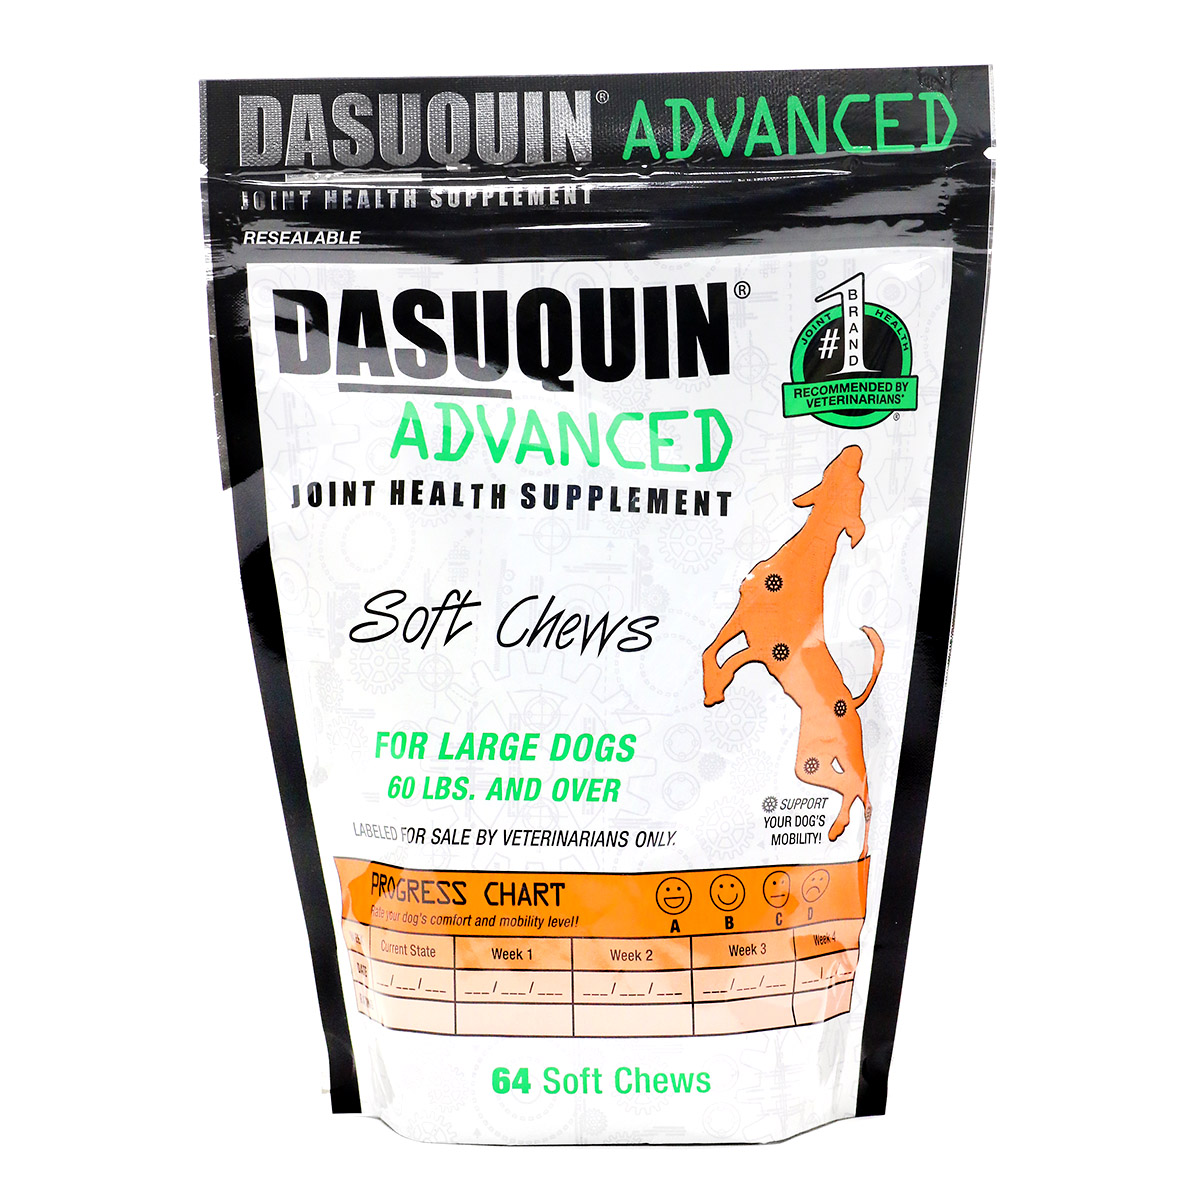 Barr North Veterinary Services. DASUQUIN ADVANCED SOFT CHEWS for LARGE